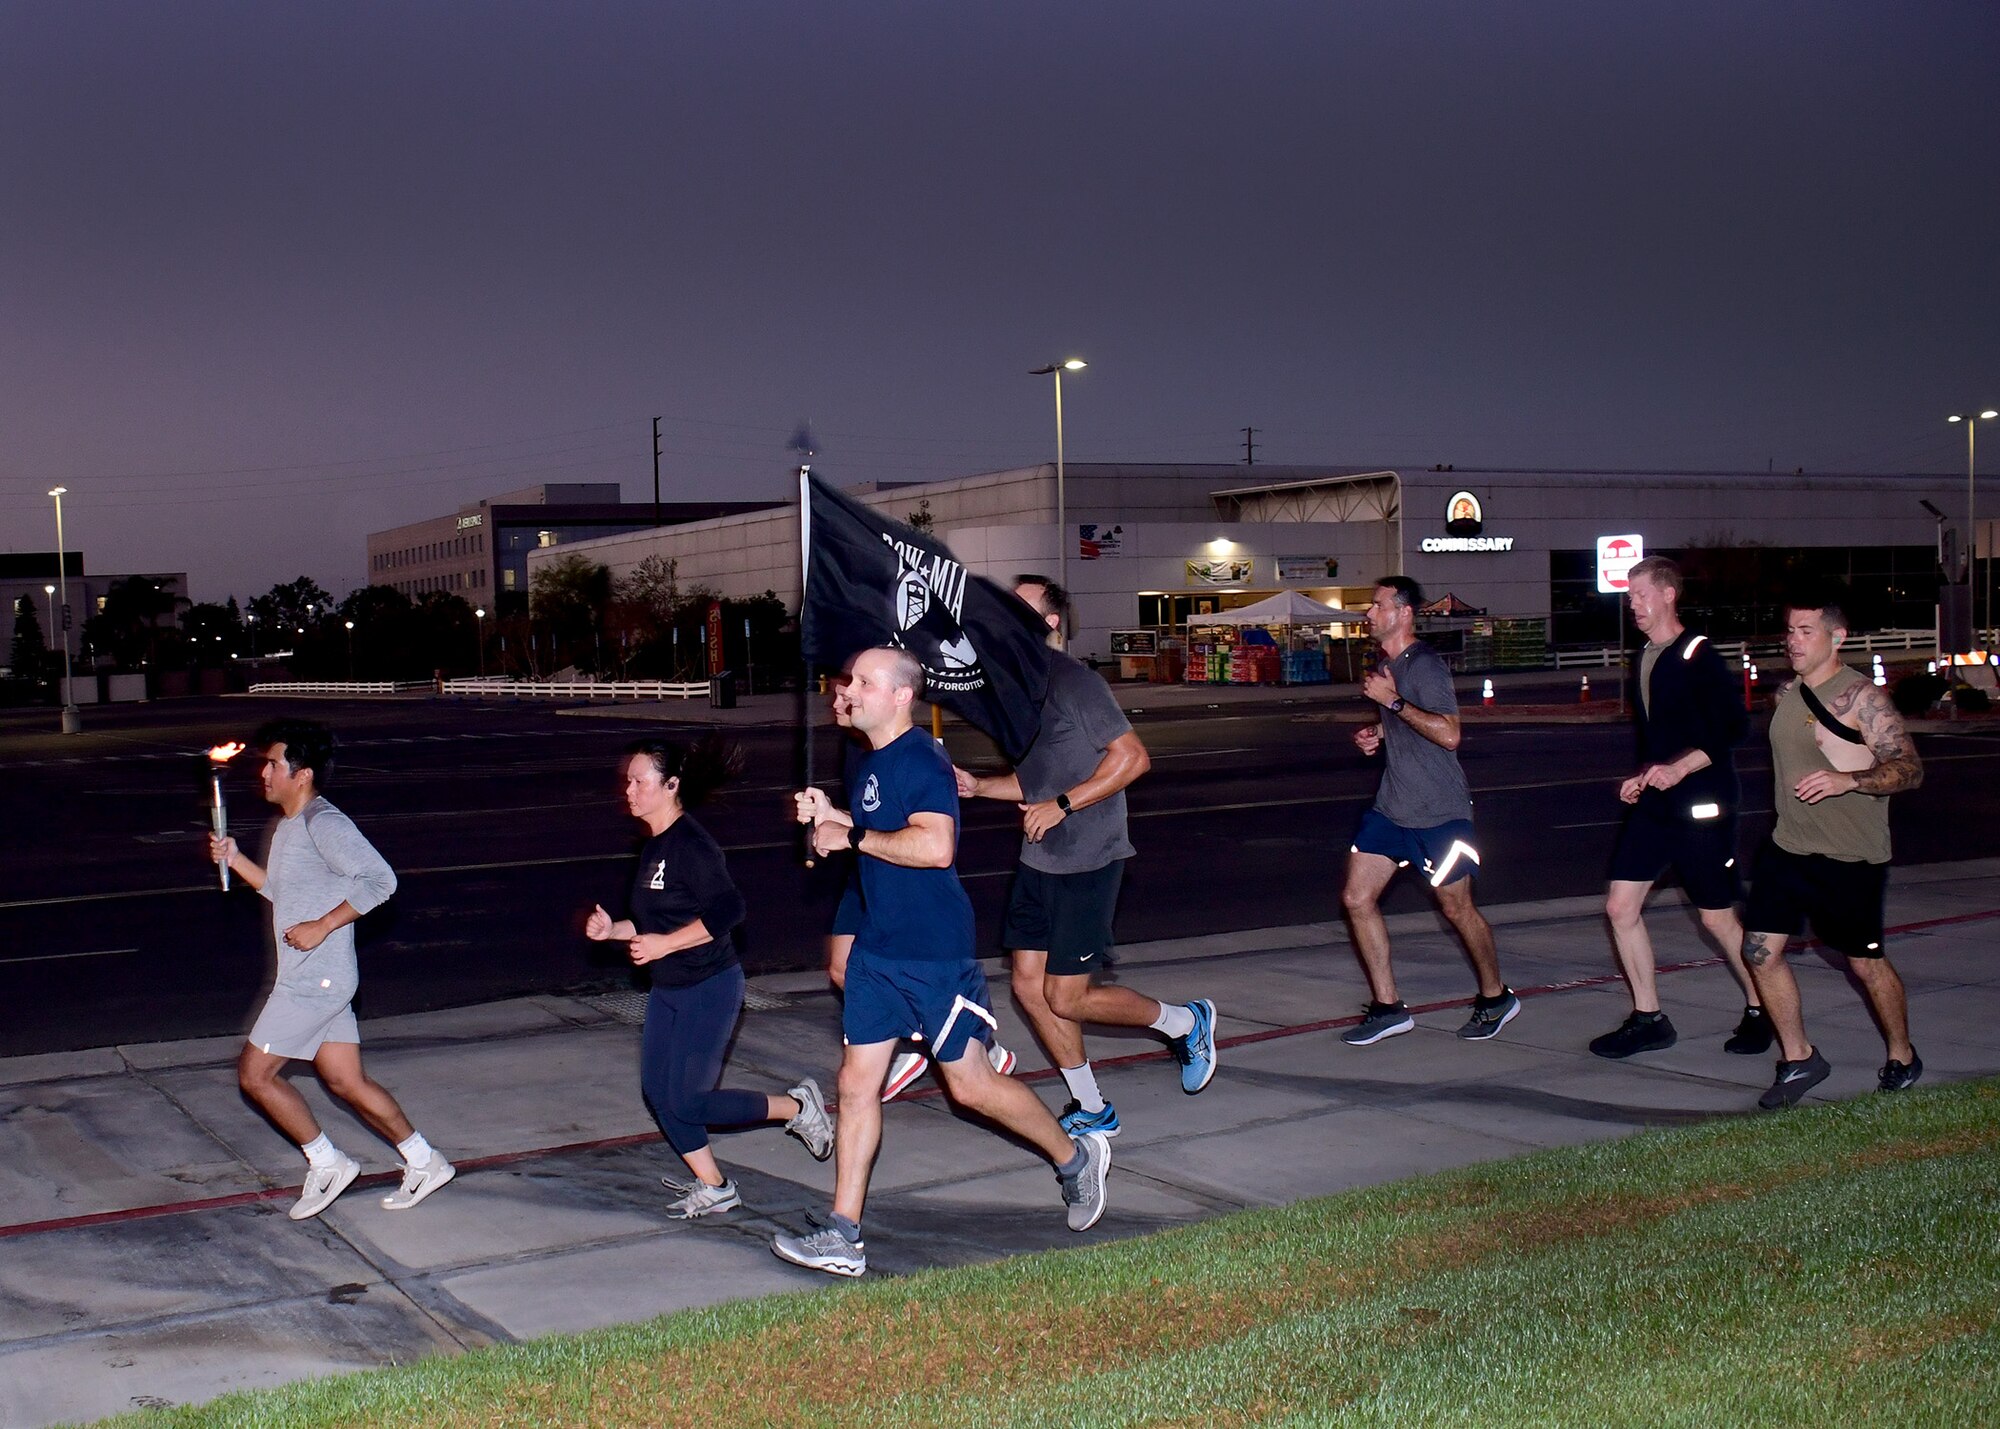 Los Angeles Air Force Base held a remembrance event for National POW/MIA Recognition Day that began on Sept. 15 and ended on Sept. 16 with a 54 mile torch run and wreath laying ceremony.